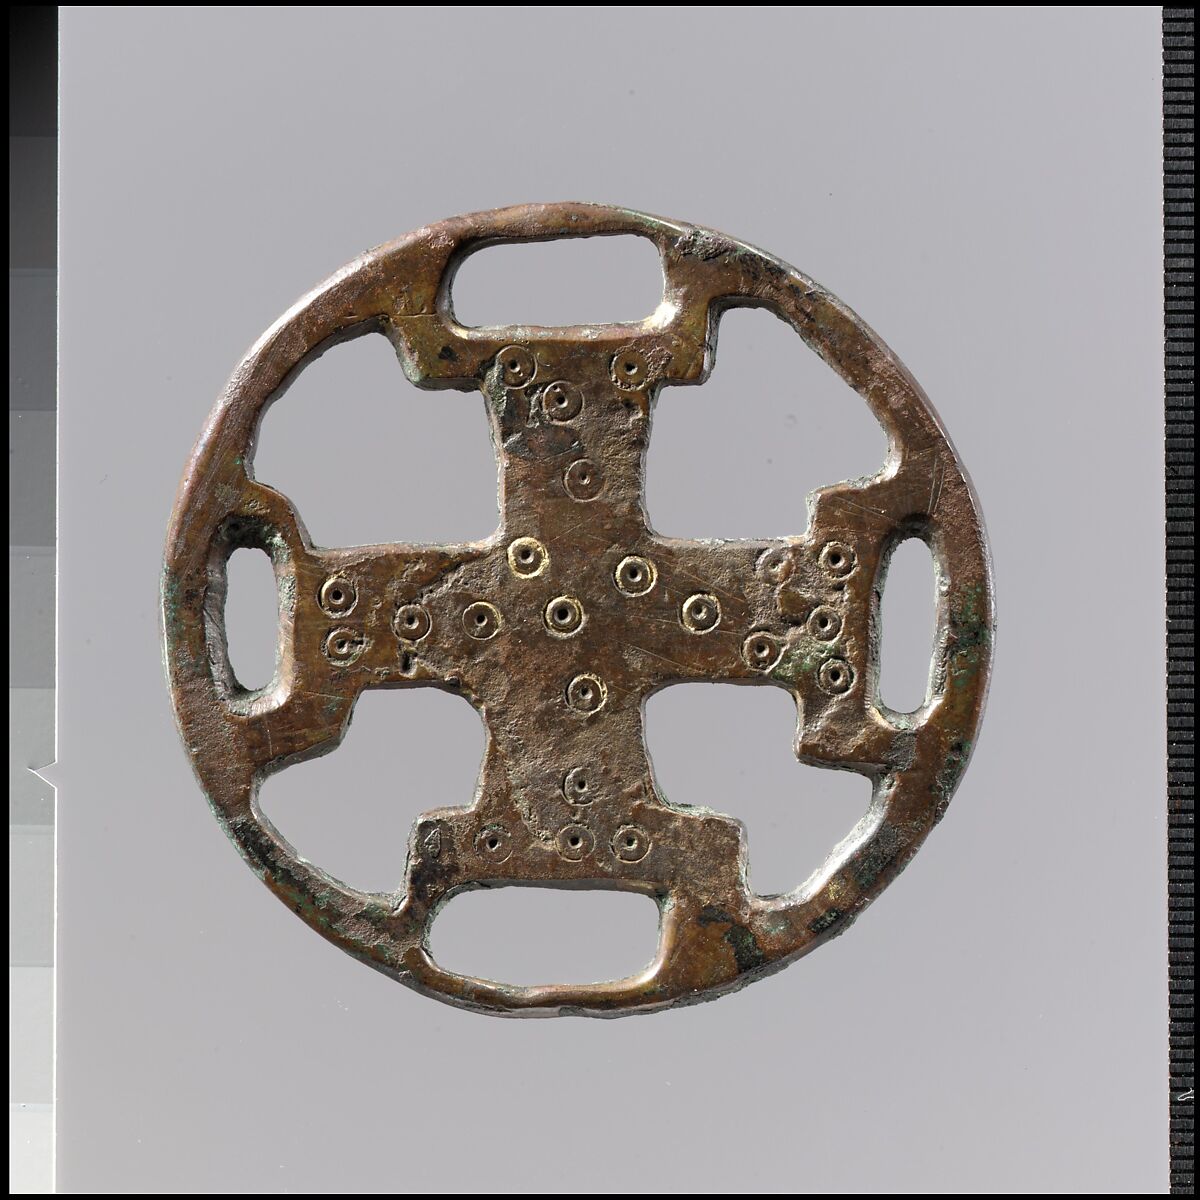 Openwork Belt Fitting, Bronze, with traces of gilding, Copper alloy; copper alloy with tinned surface, Frankish 